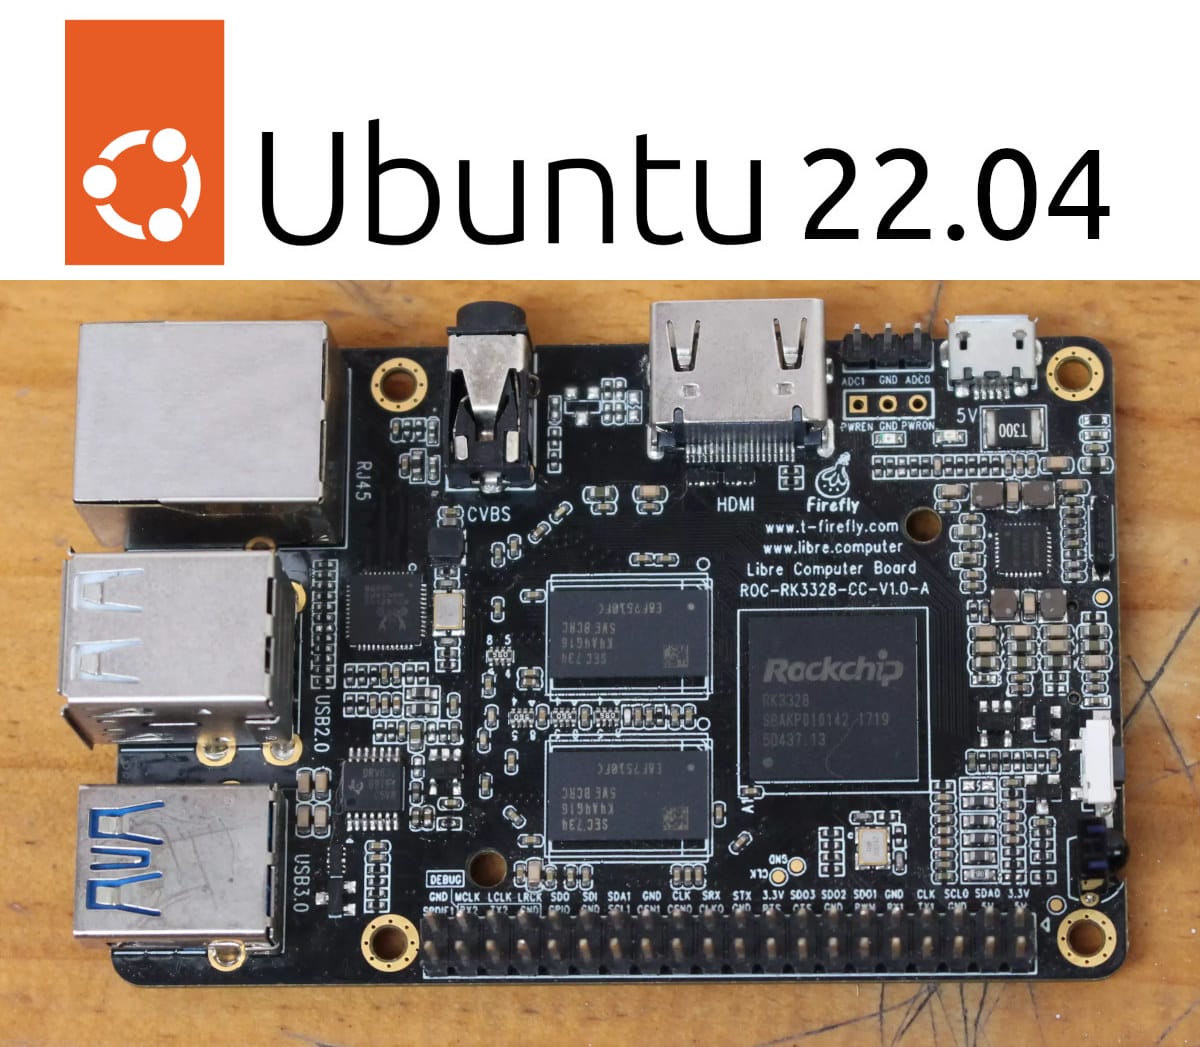 Libre Computer Roc Rk3328 Cc Now Supports Ubuntu 22 04 With Linux 5 18 2 Cnx Software